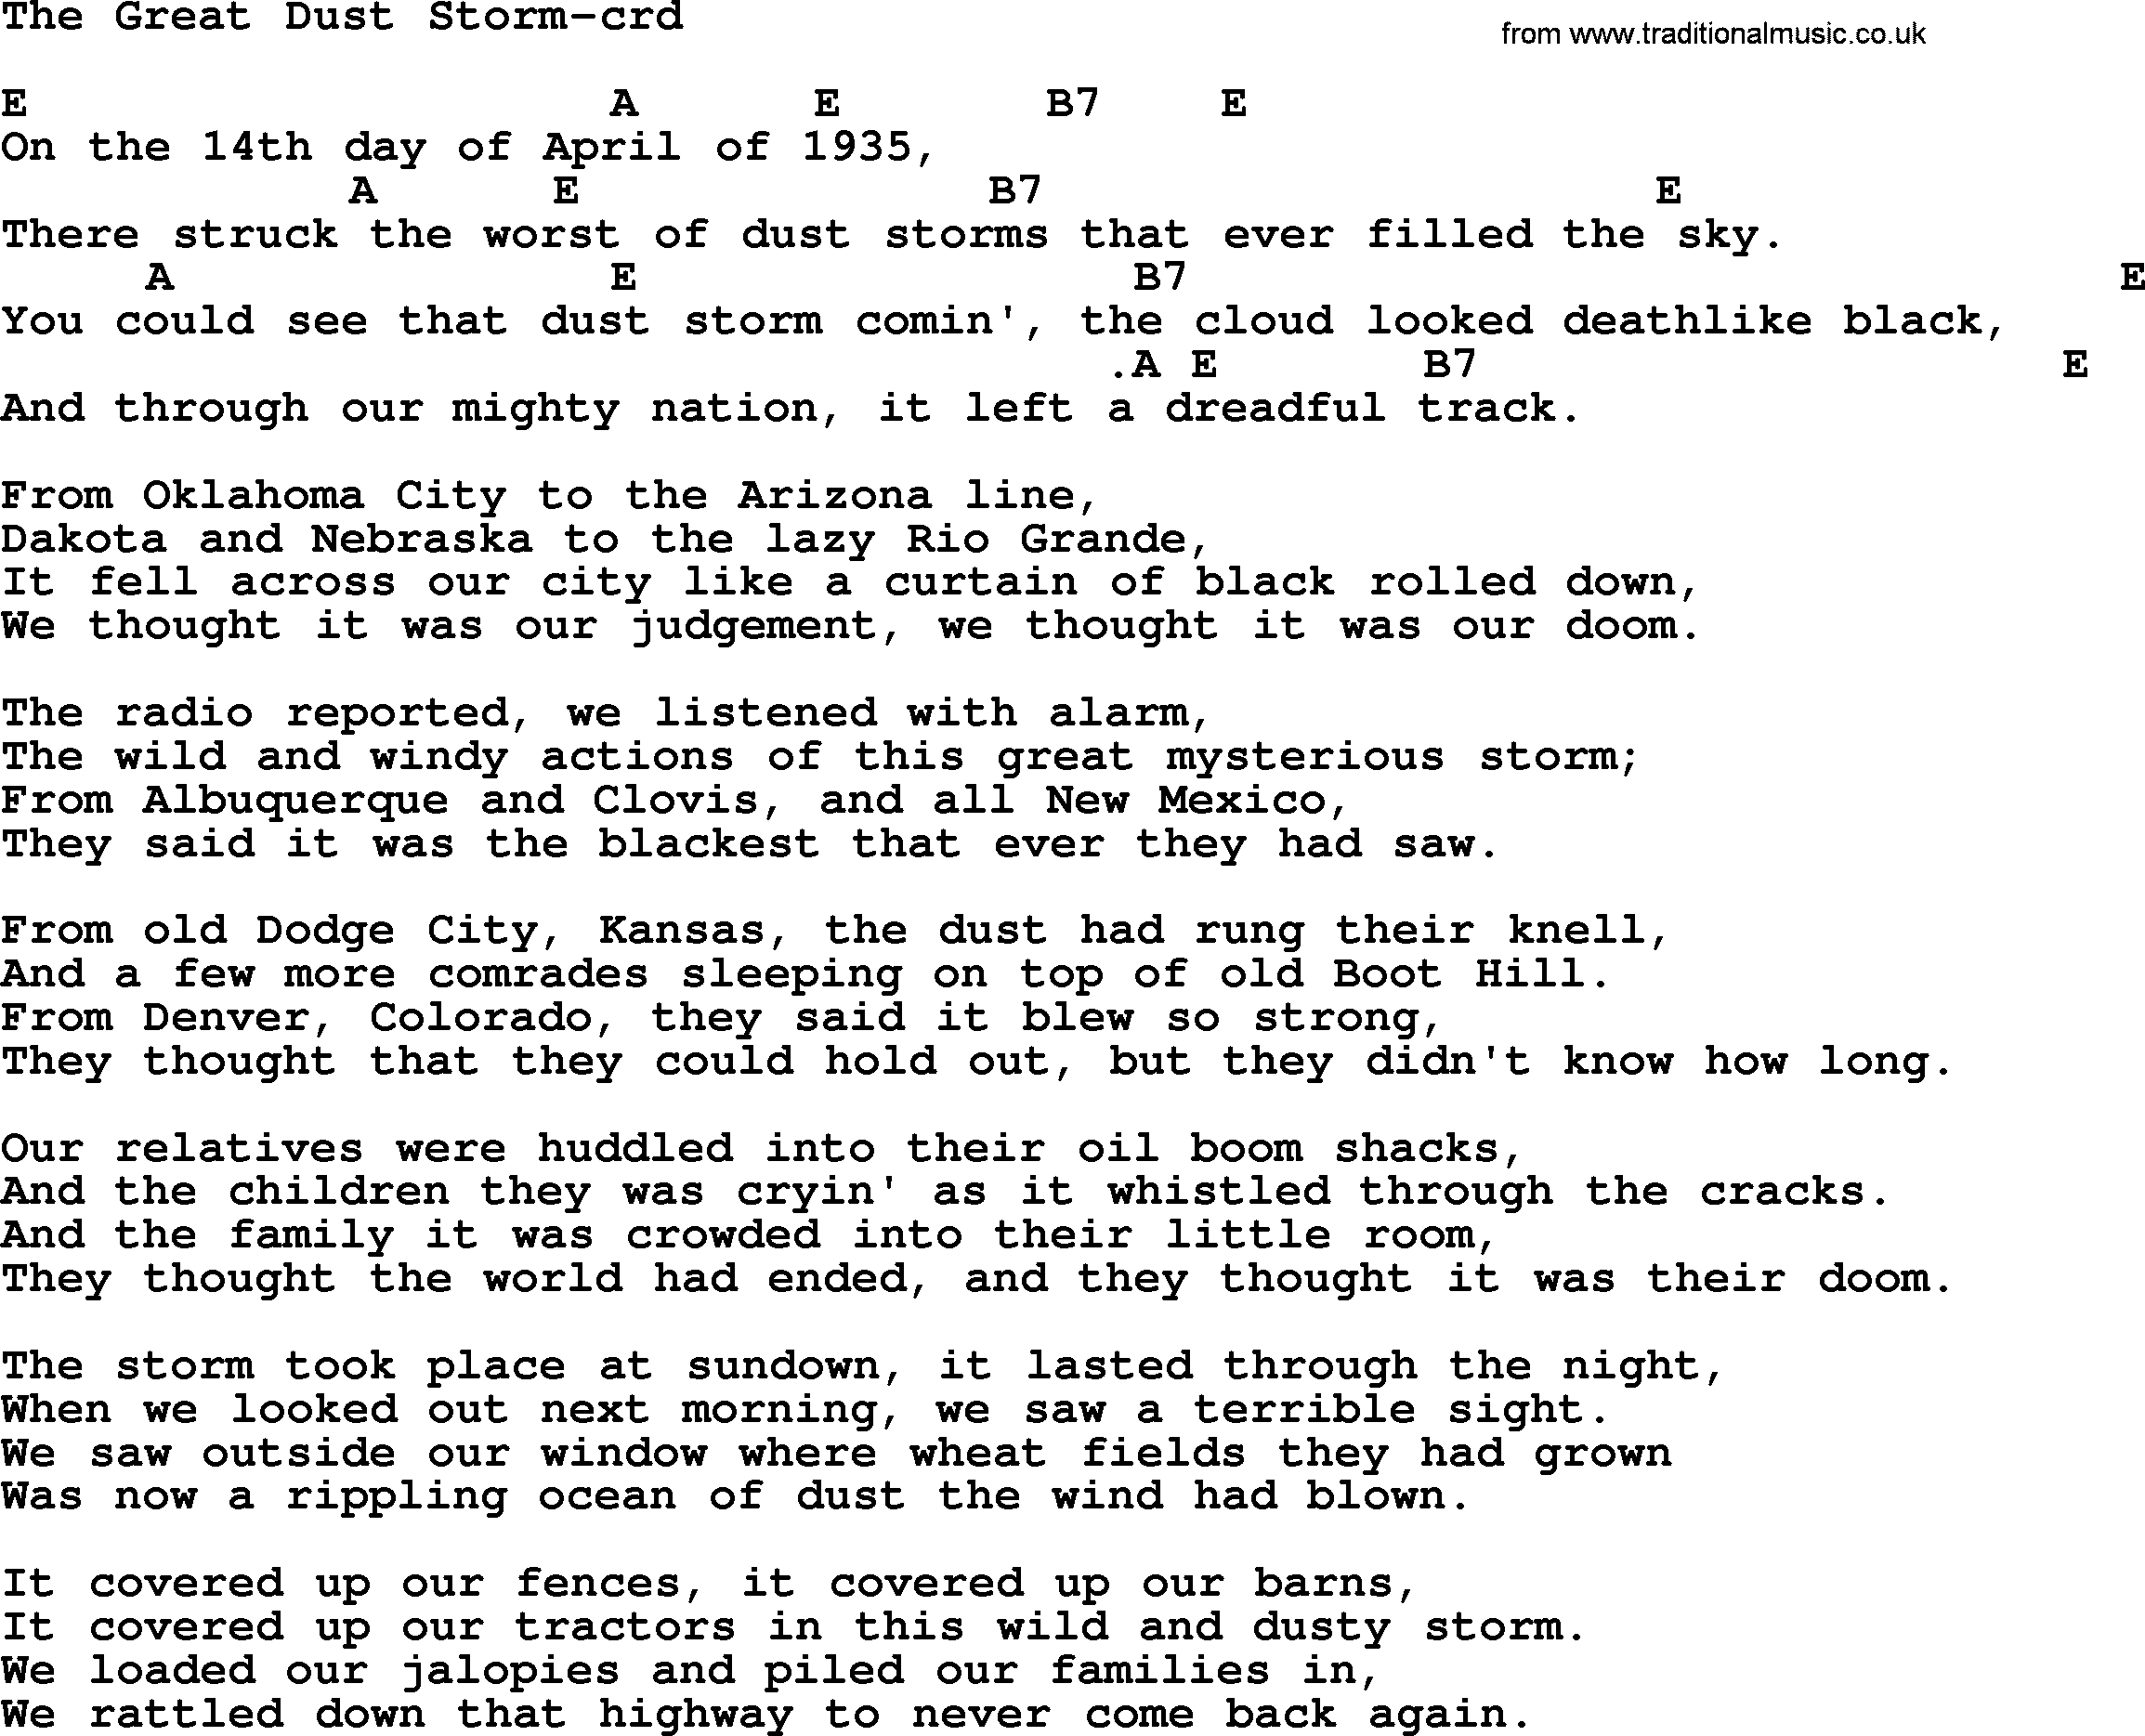 Woody Guthrie song The Great Dust Storm lyrics and chords